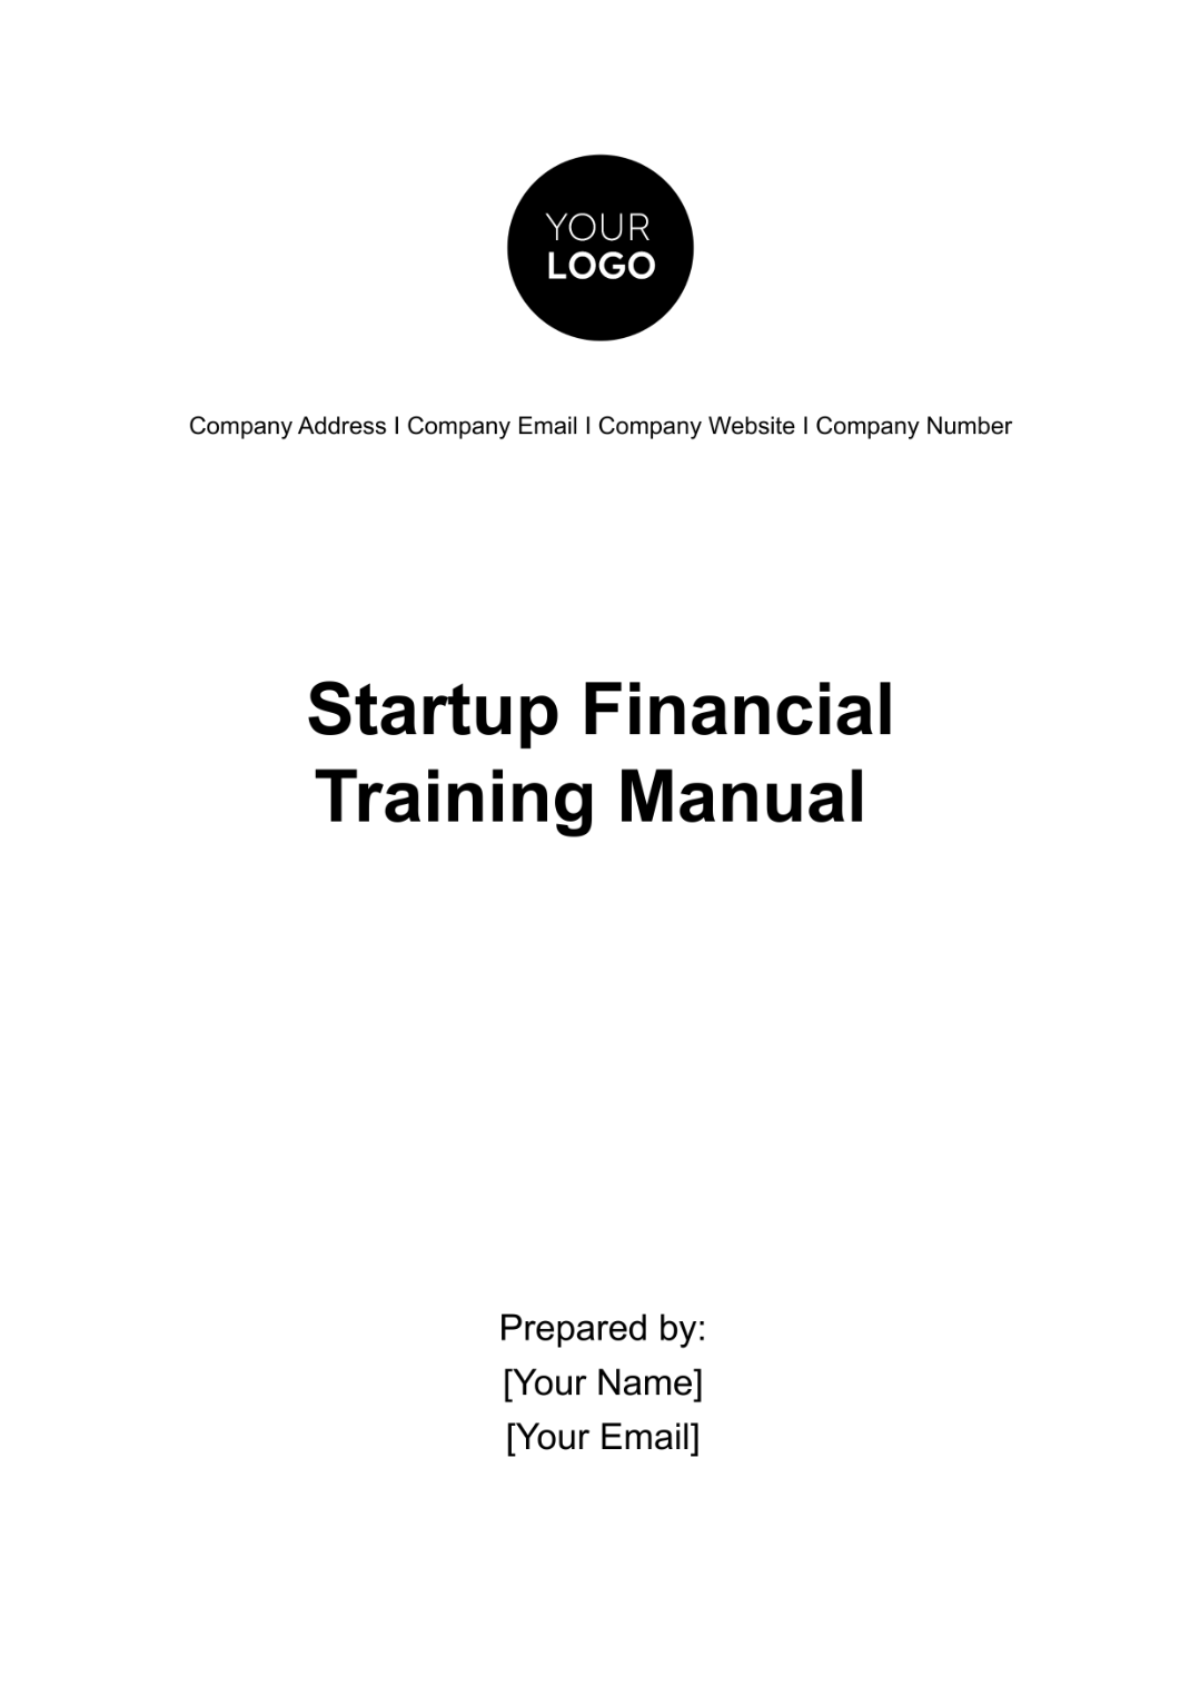 Startup Financial Training Manual Template